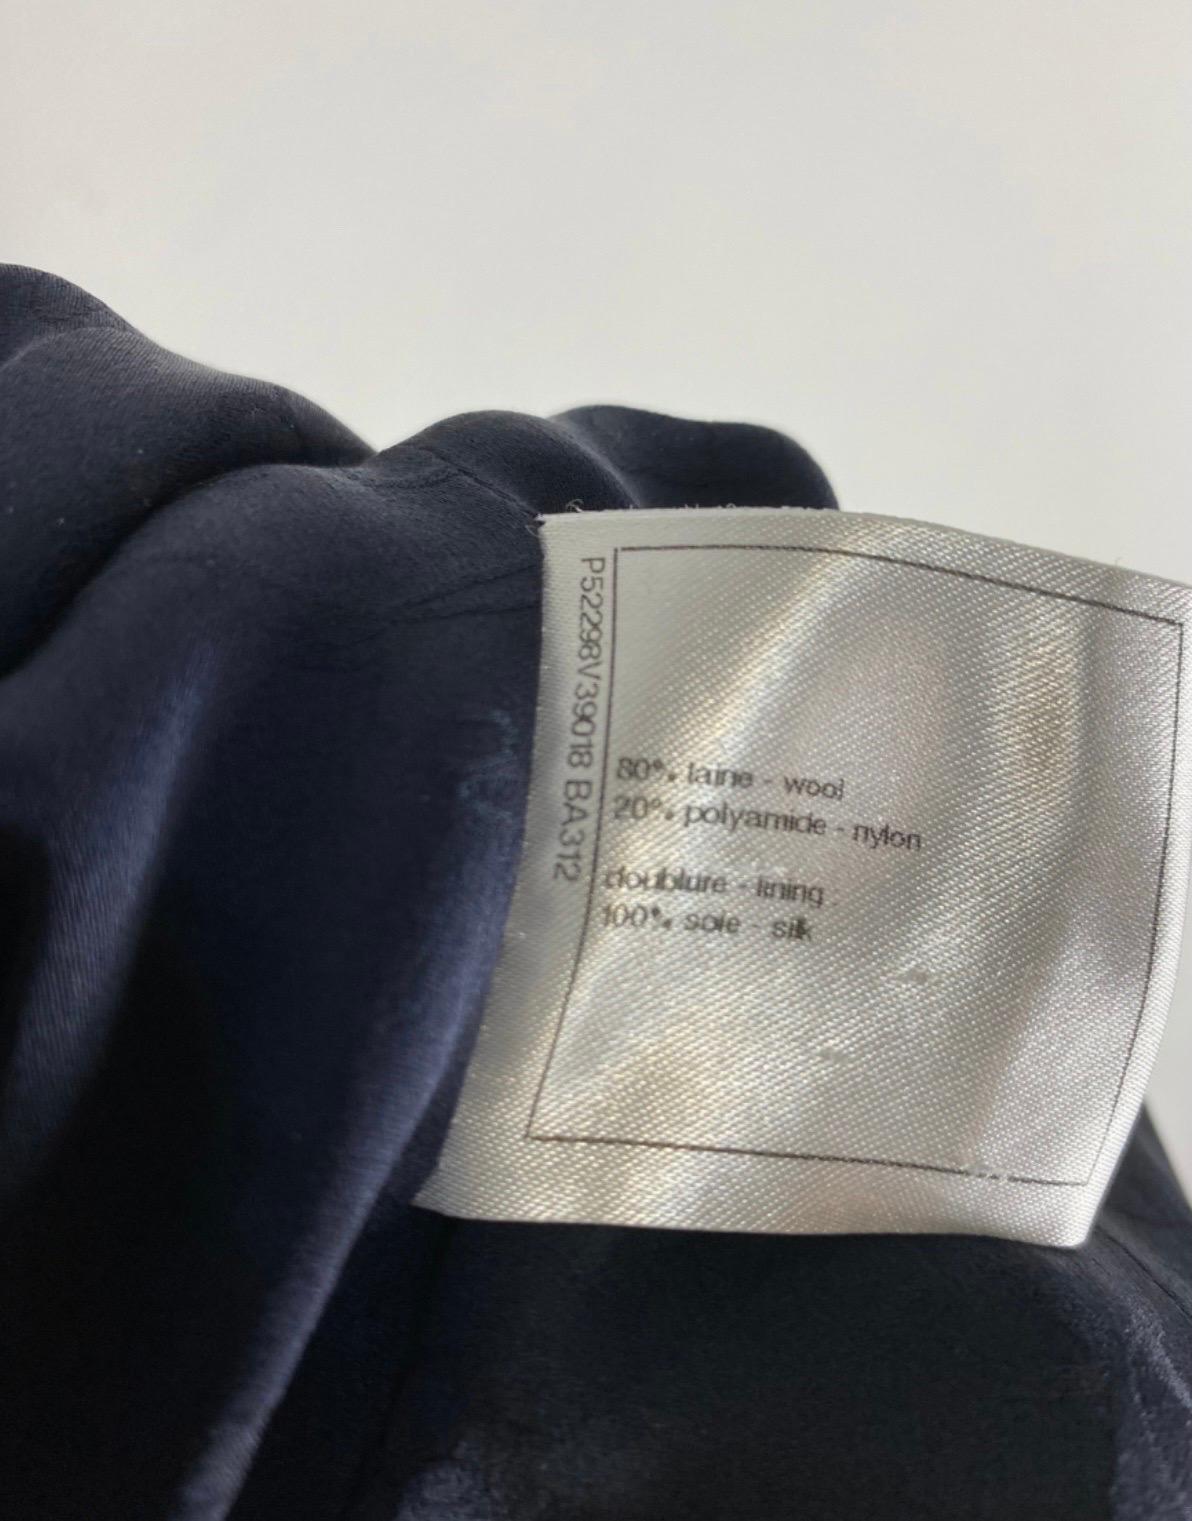 Chanel jacket size 34 French therefore 38Italian, in blue wool worked like a boucle, with a particular closure on the front, on the back instead the 2 side slits are enriched with two buttons, long jacket, the only defect is that a button is missing